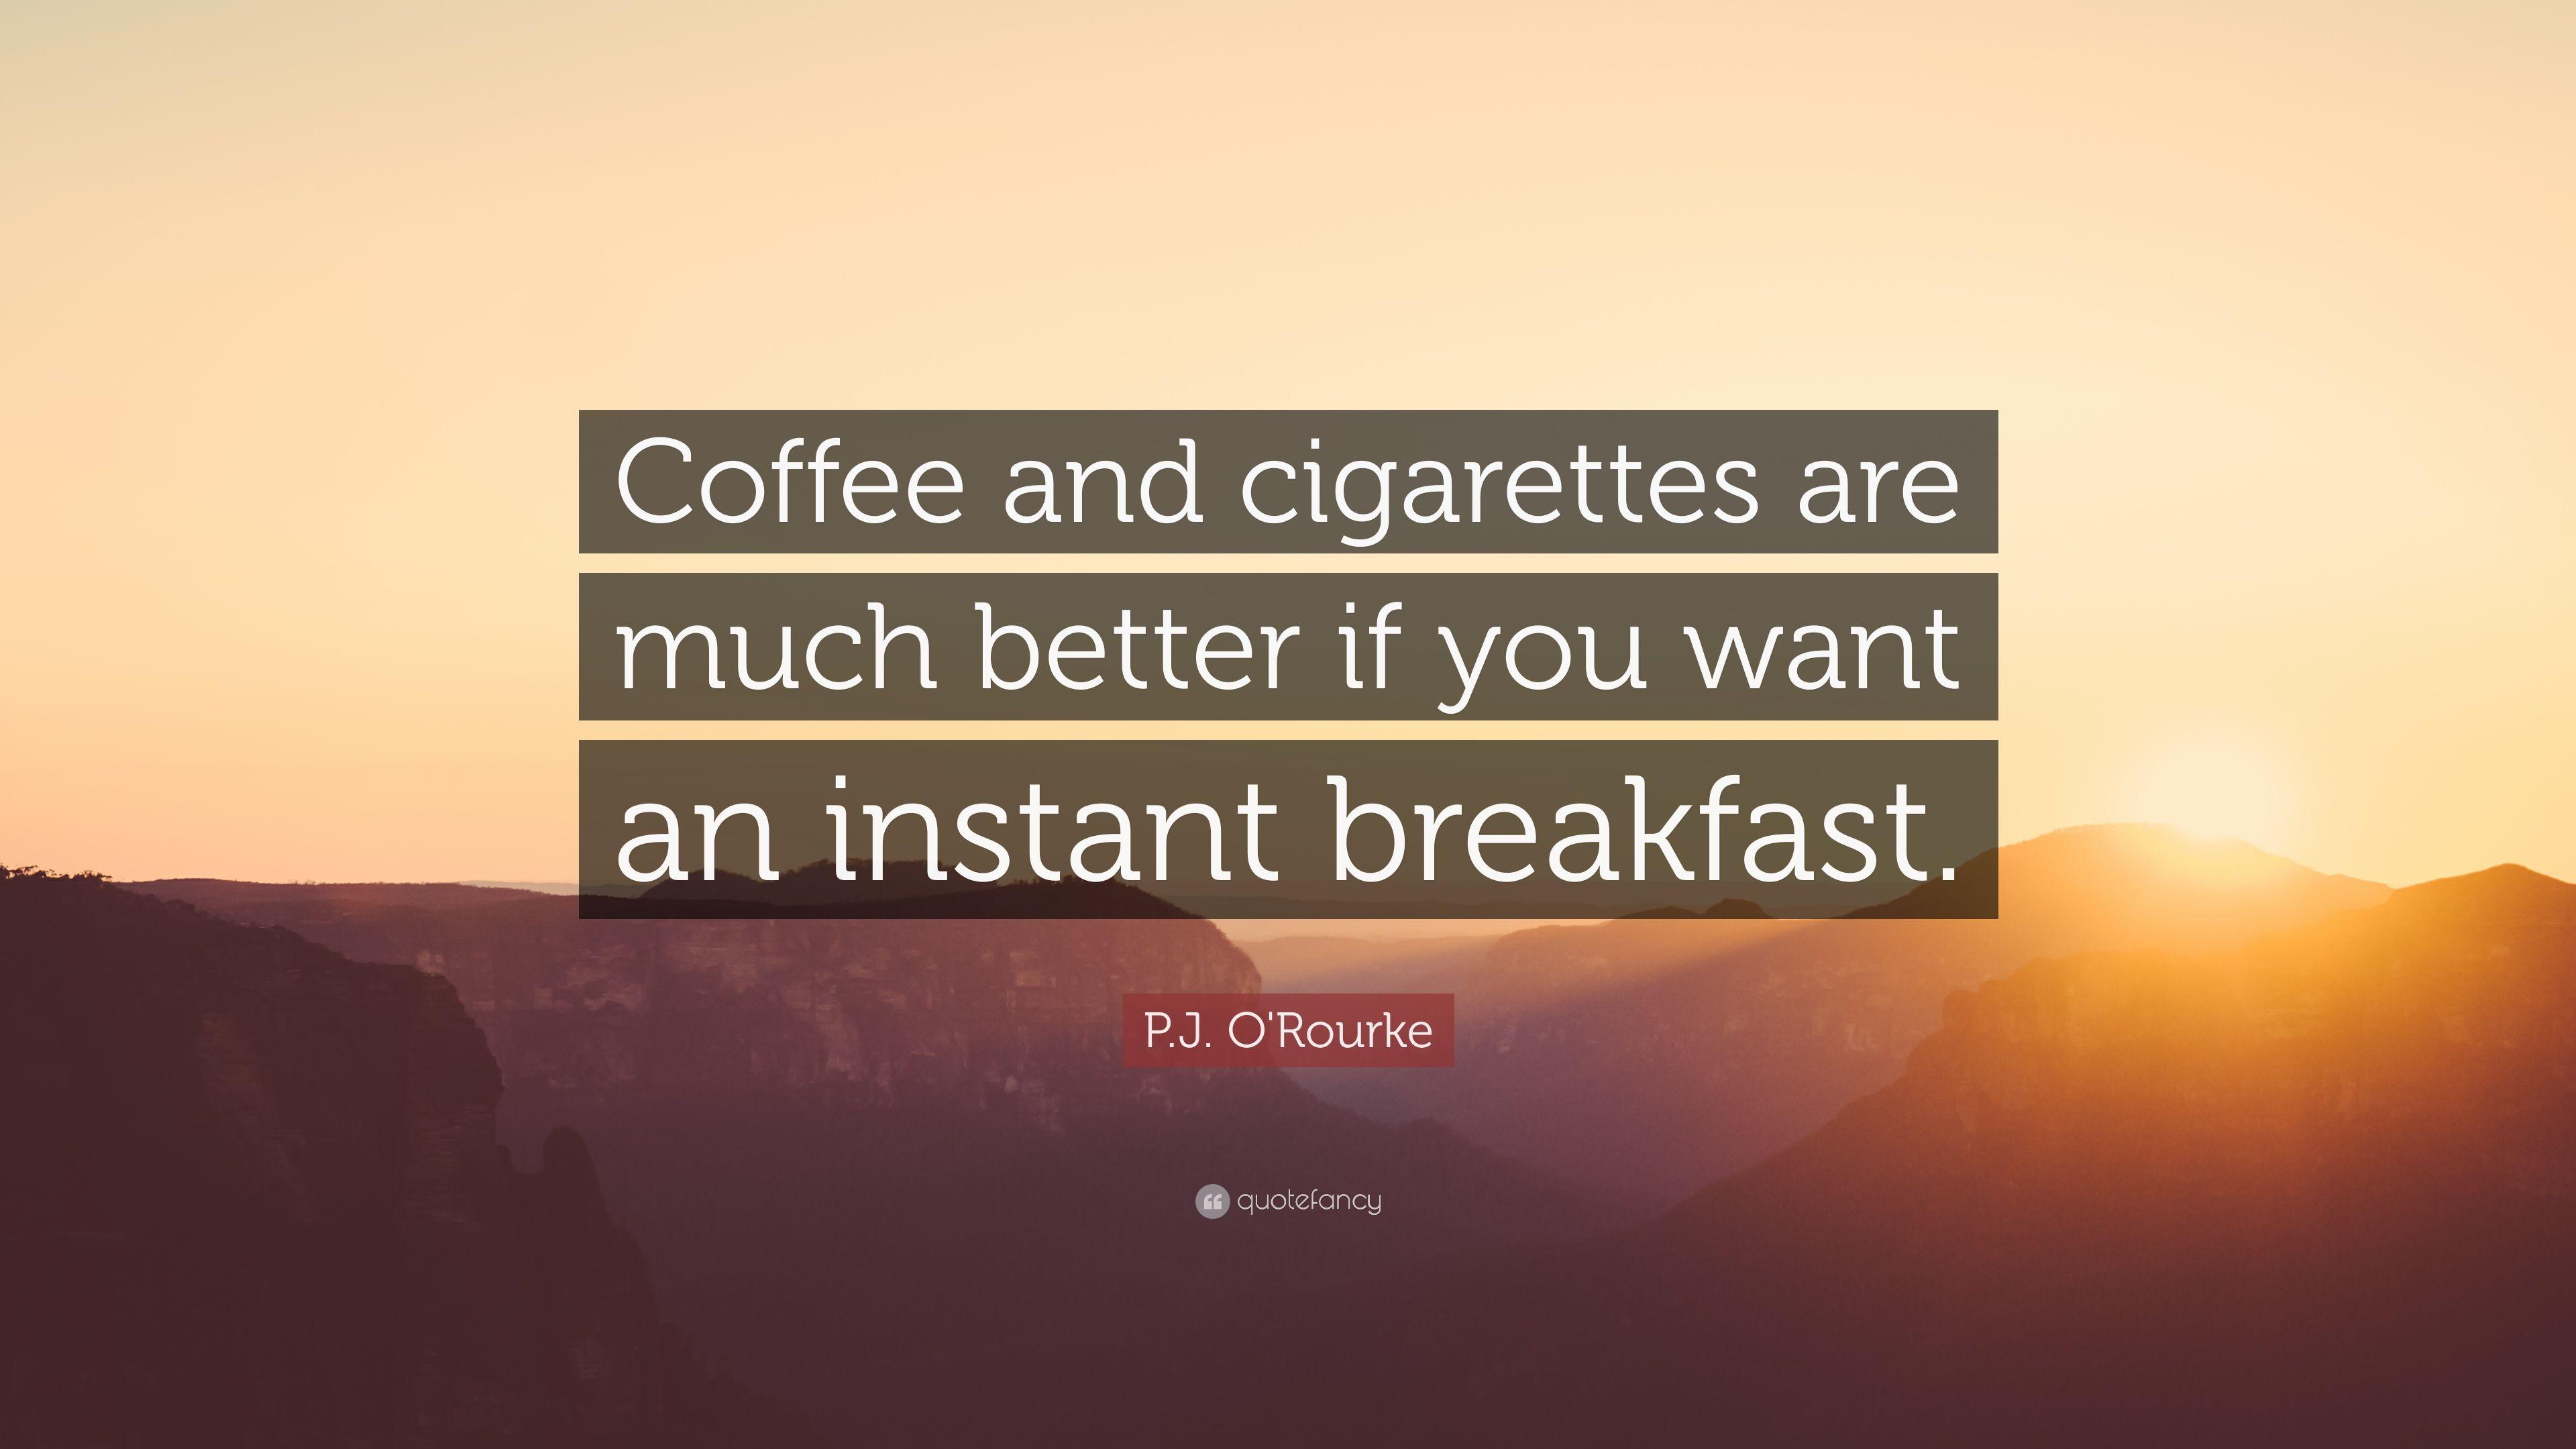 P.J. O'Rourke Quote: “Coffee and cigarettes are much better if you